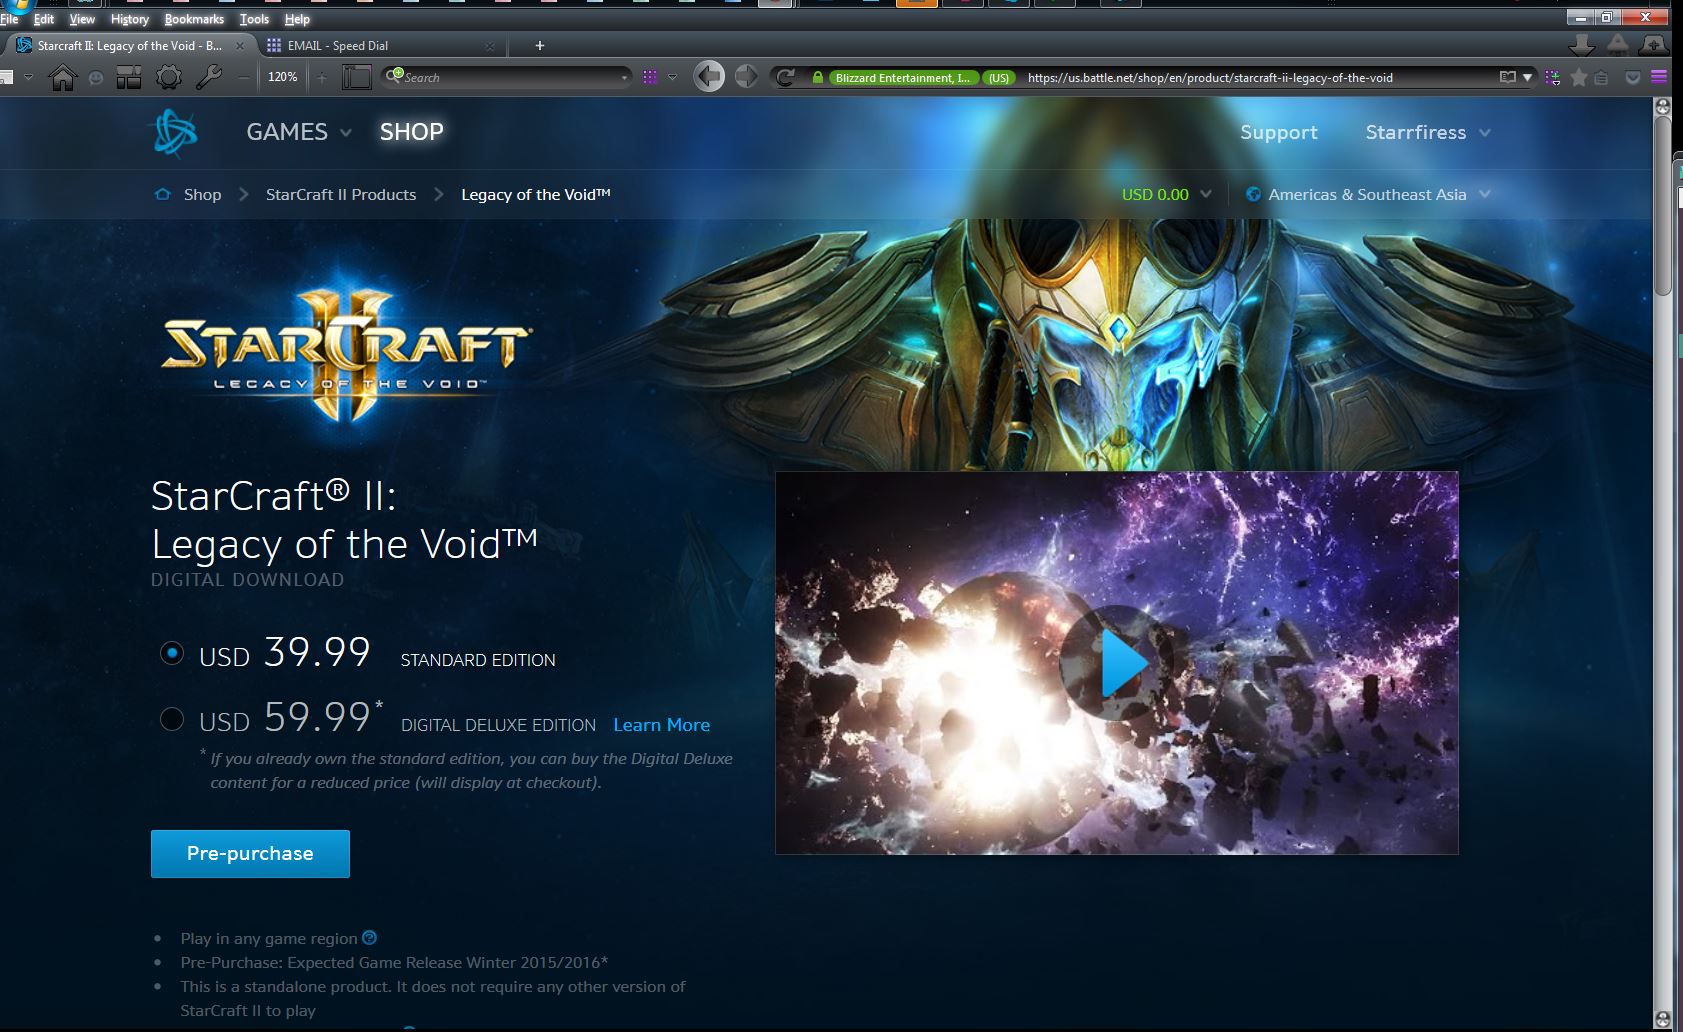 Voices of the void отчет. Старкрафт Legacy of the Void. STARCRAFT 2 Legacy og the Void. STARCRAFT 2 Deluxe Edition. STARCRAFT II Legacy of the Void.